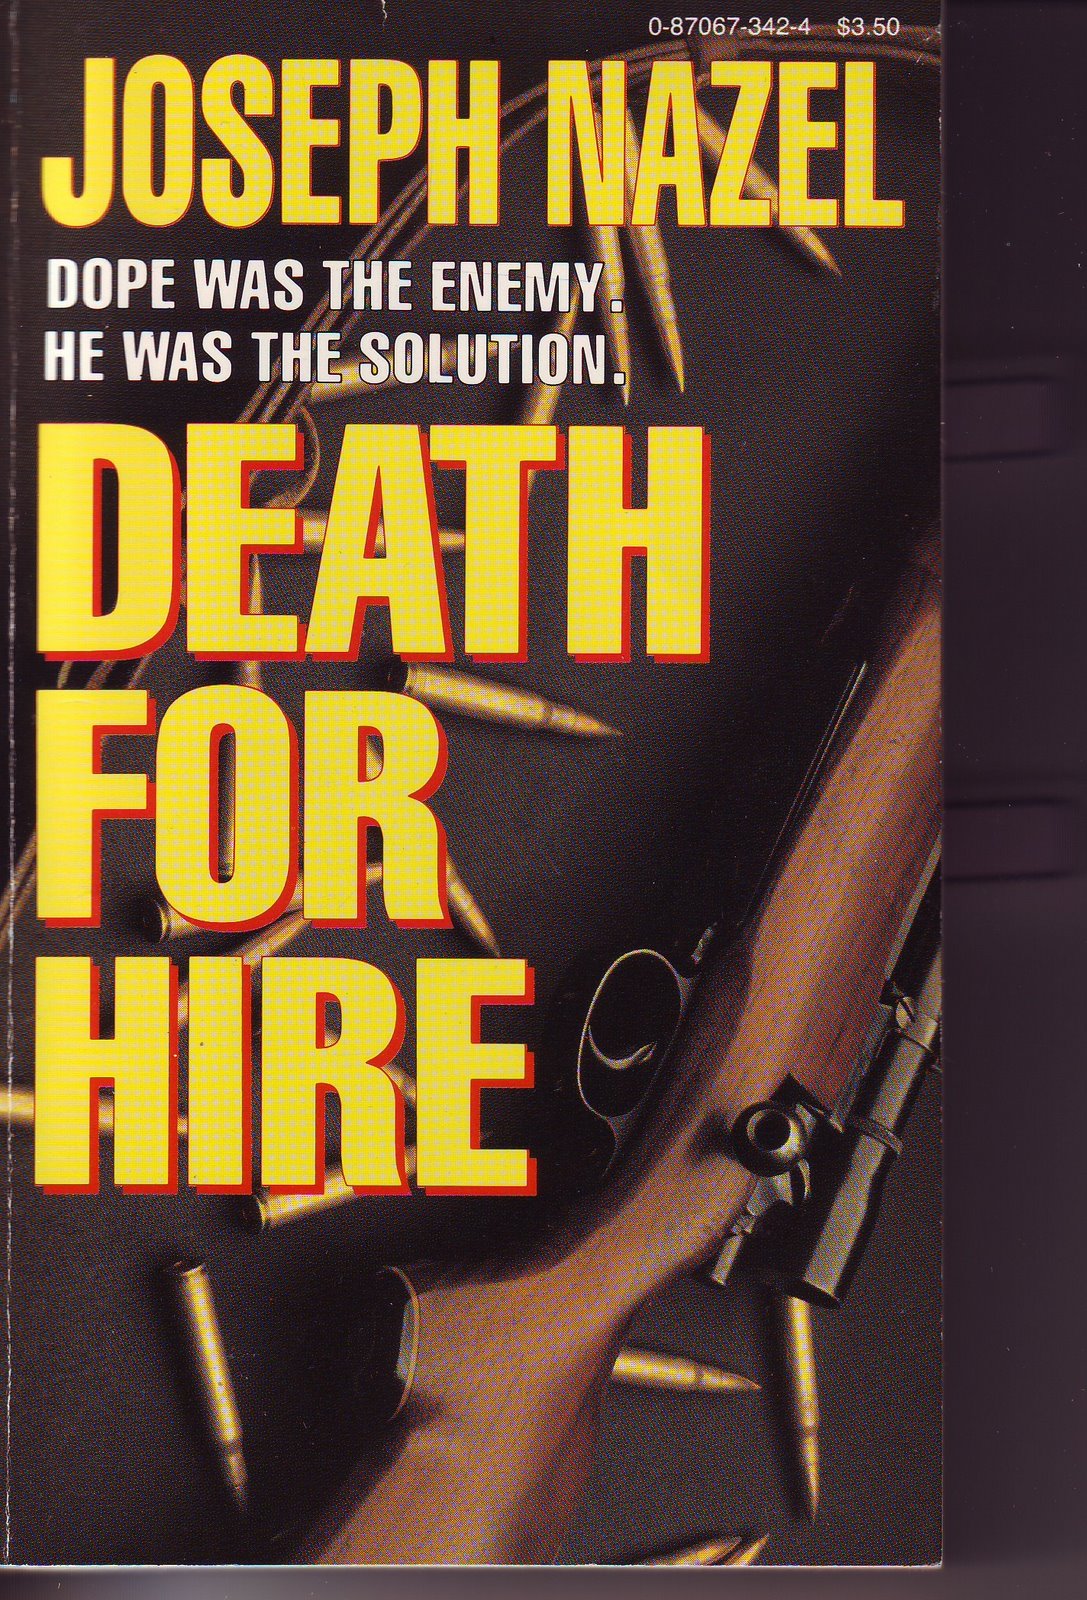 [DEATH+FOR+HIRE0002.JPG]